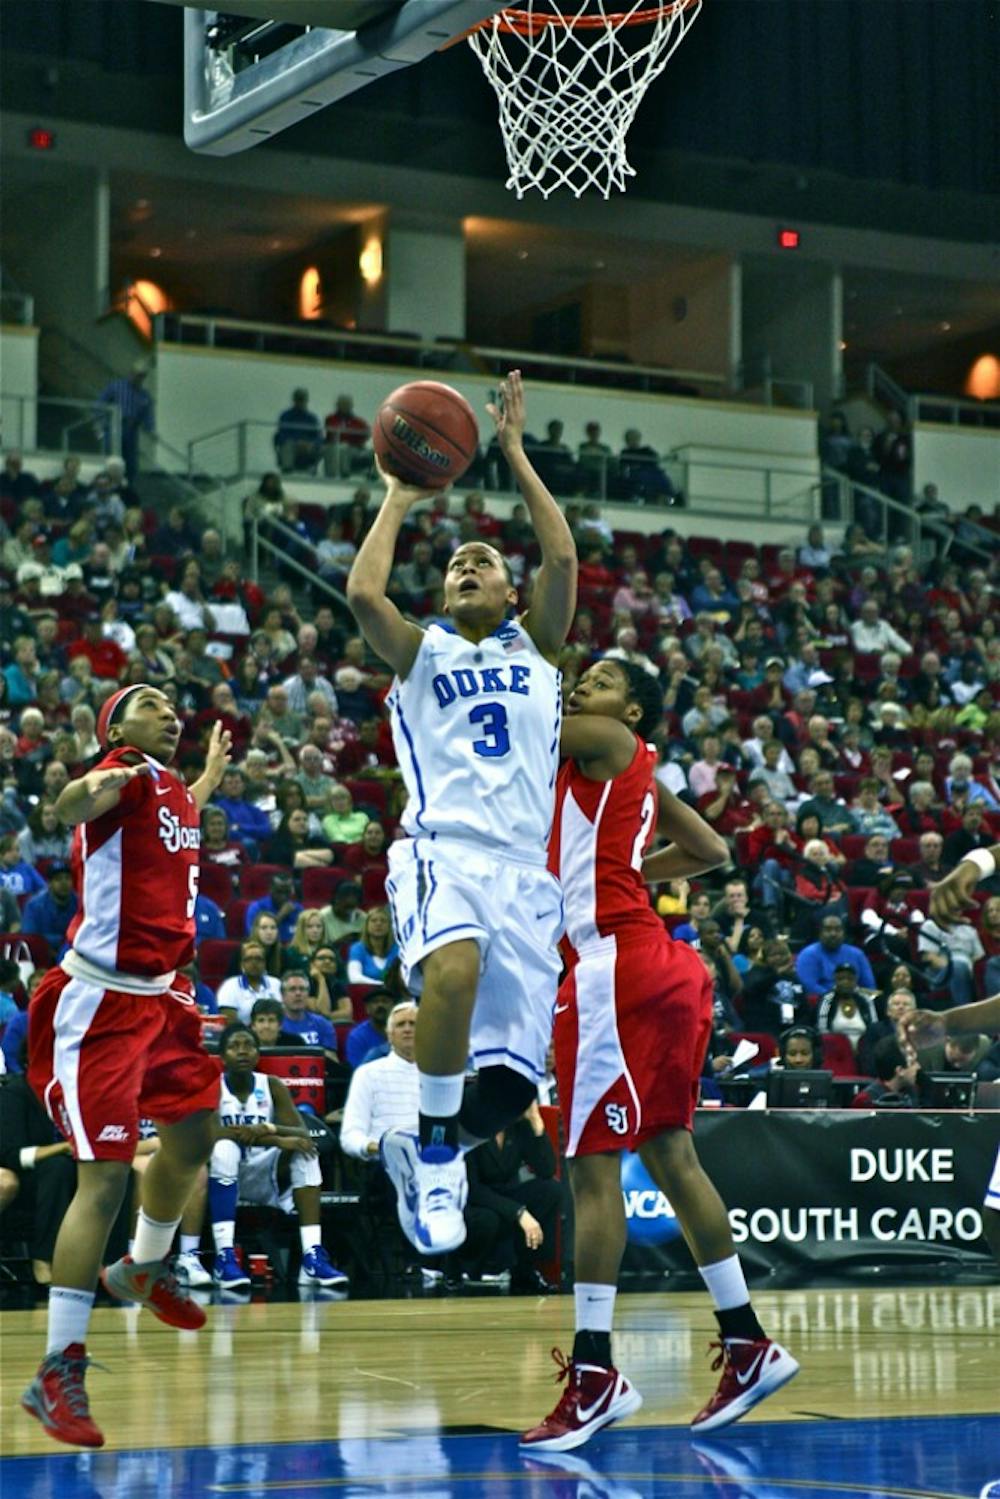 Shay Selby scored a team-high 18 points and dished seven assists in the Blue Devils' Sweet 16 win.